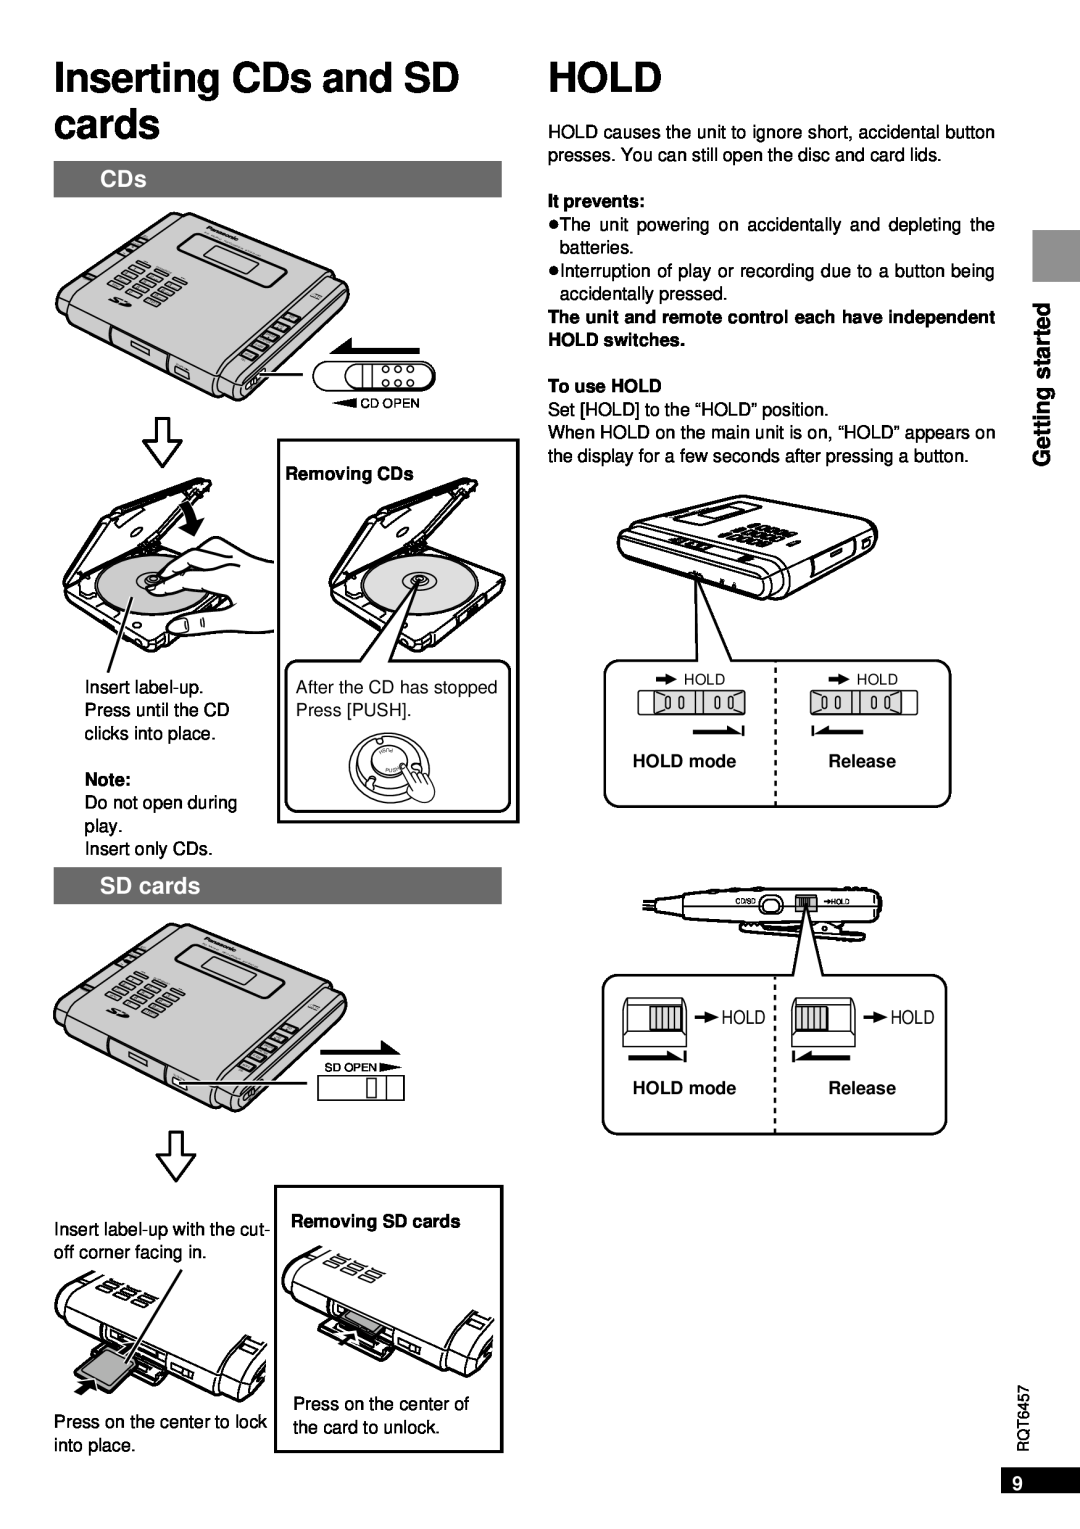 Panasonic SV-SR100 operating instructions Inserting CDs and SD cards, Hold, started 